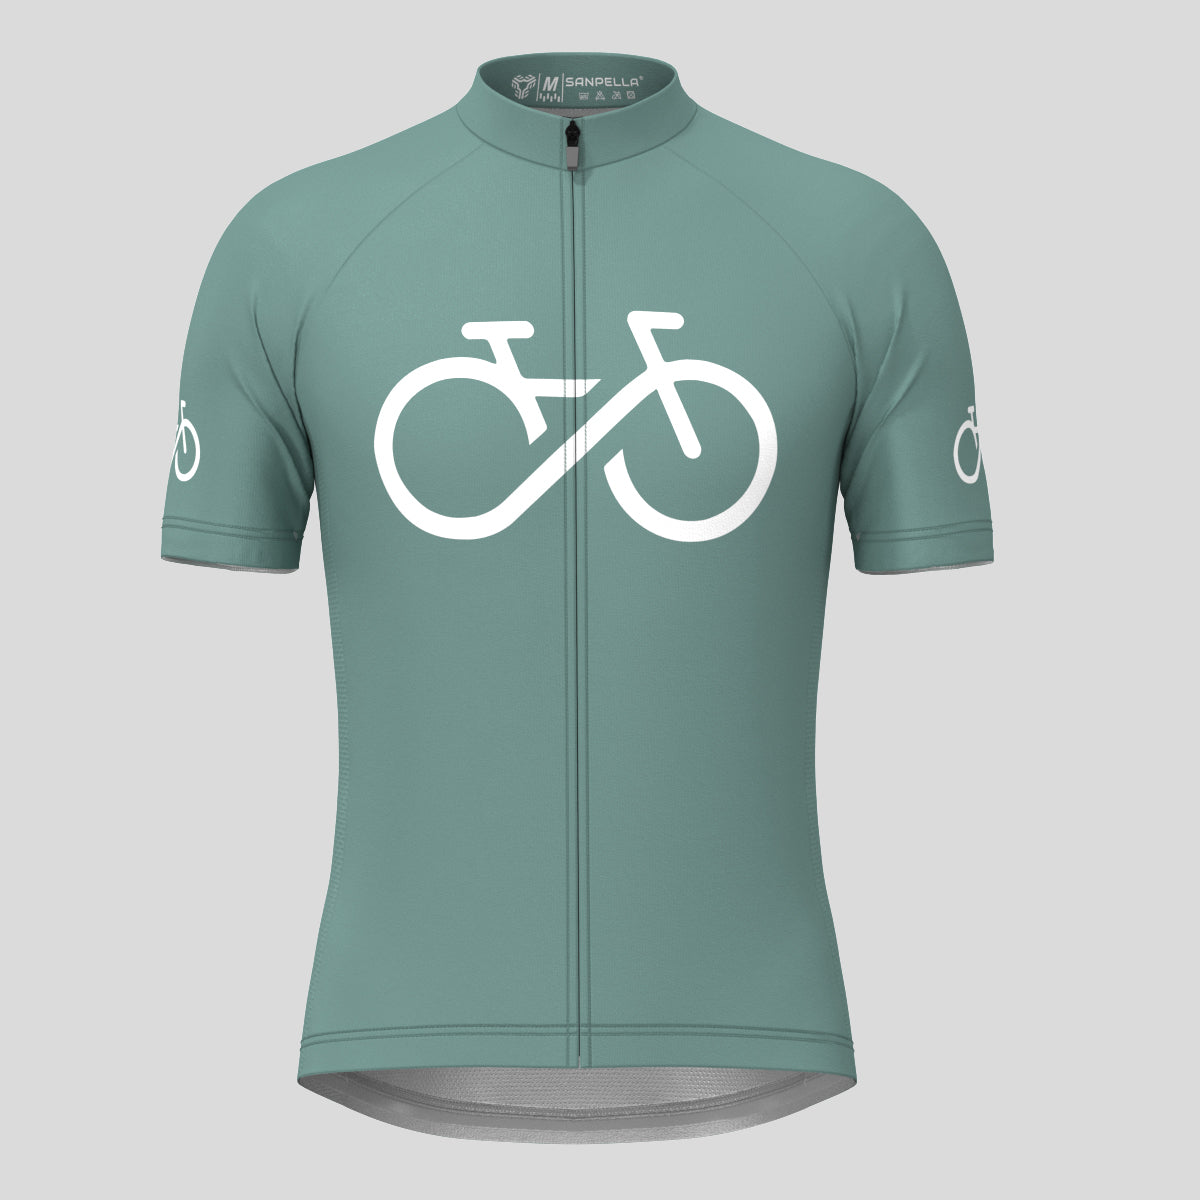 Bike Forever Men's Cycling Jersey -Sage